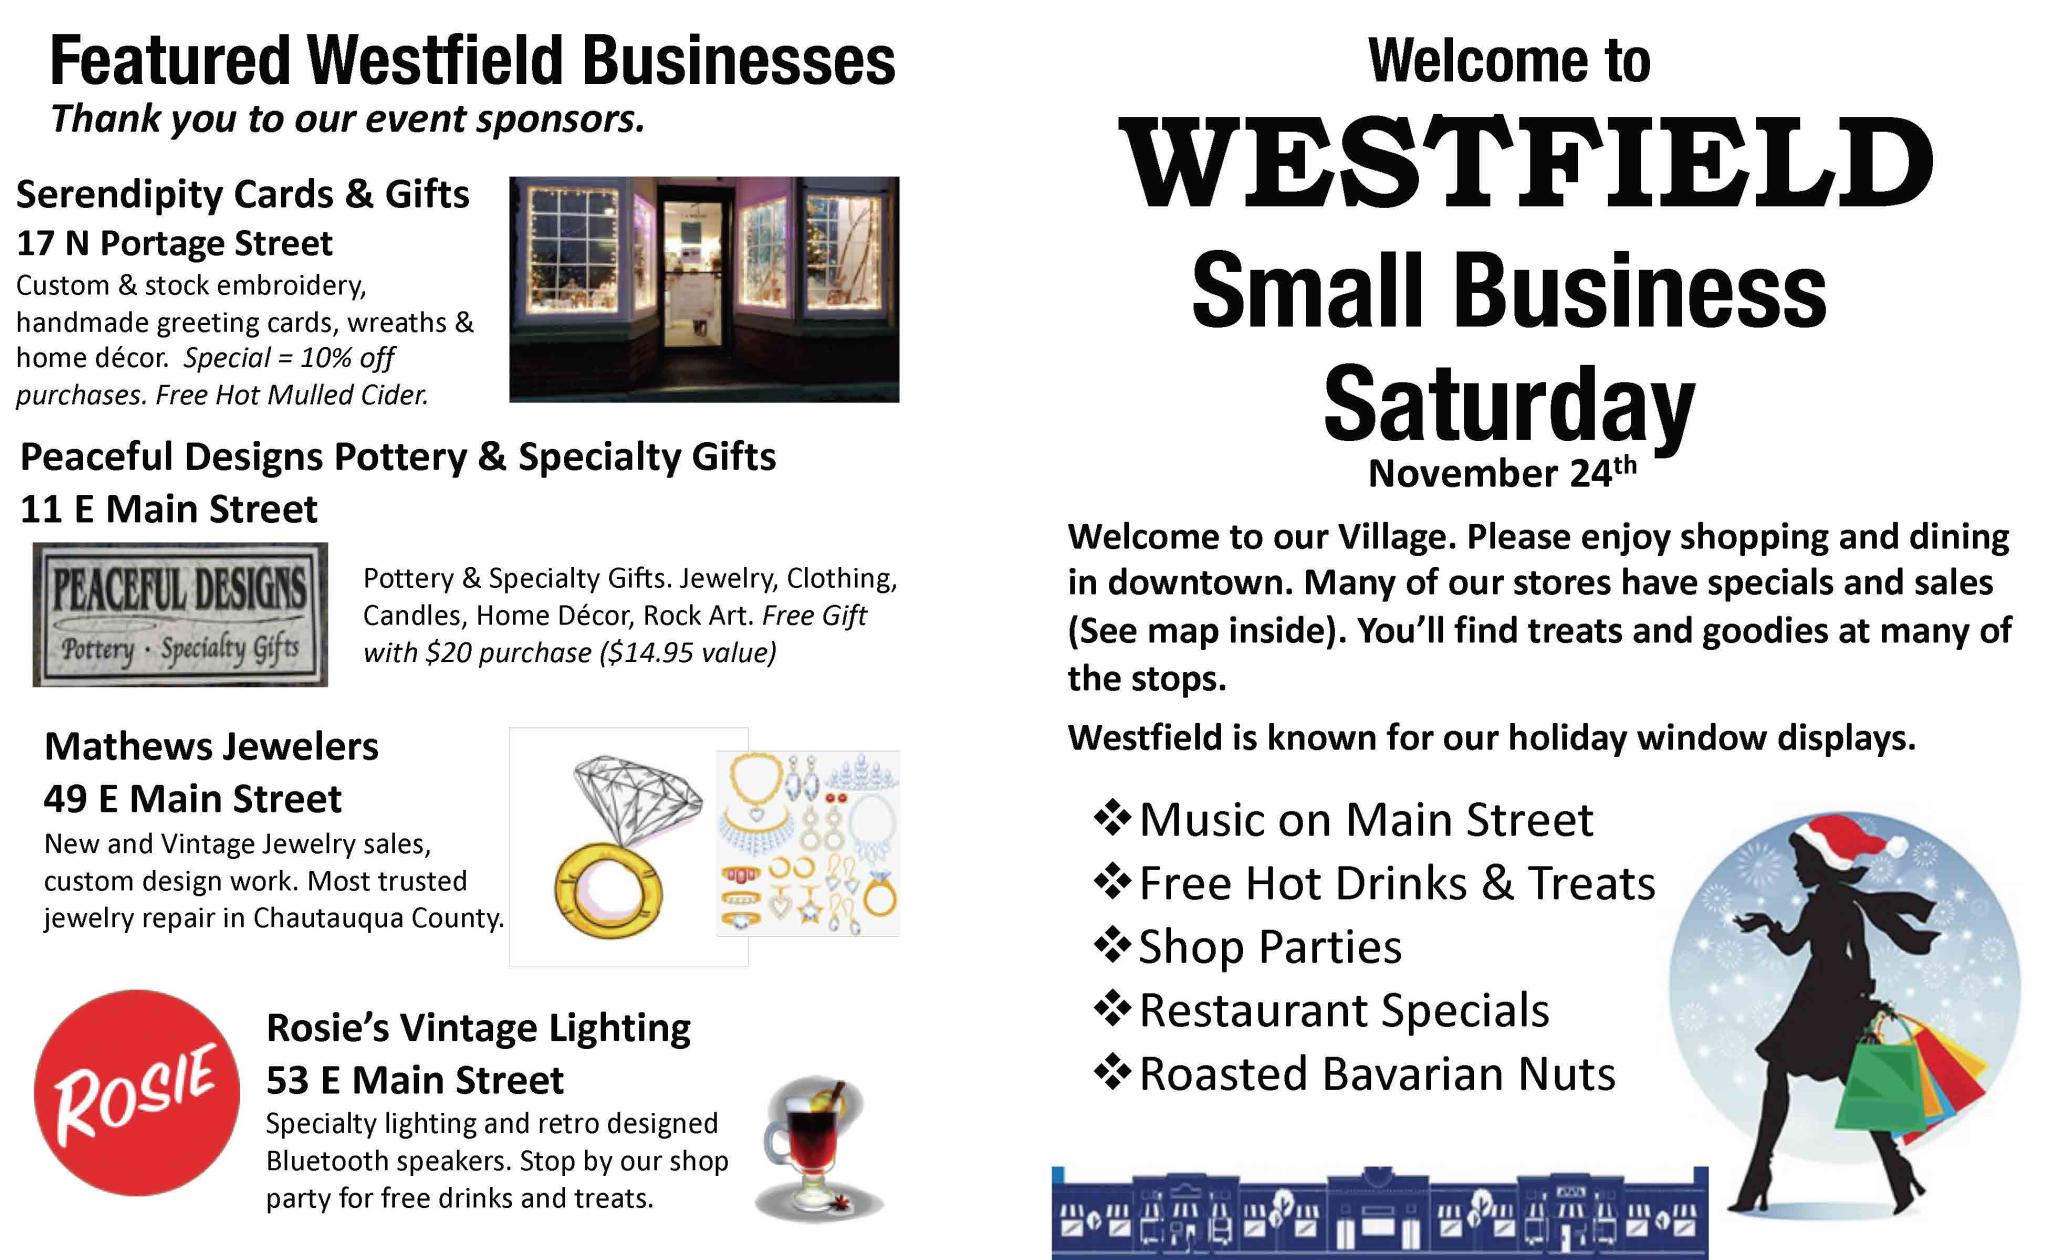 Small Business Saturday in the Village of Westfield